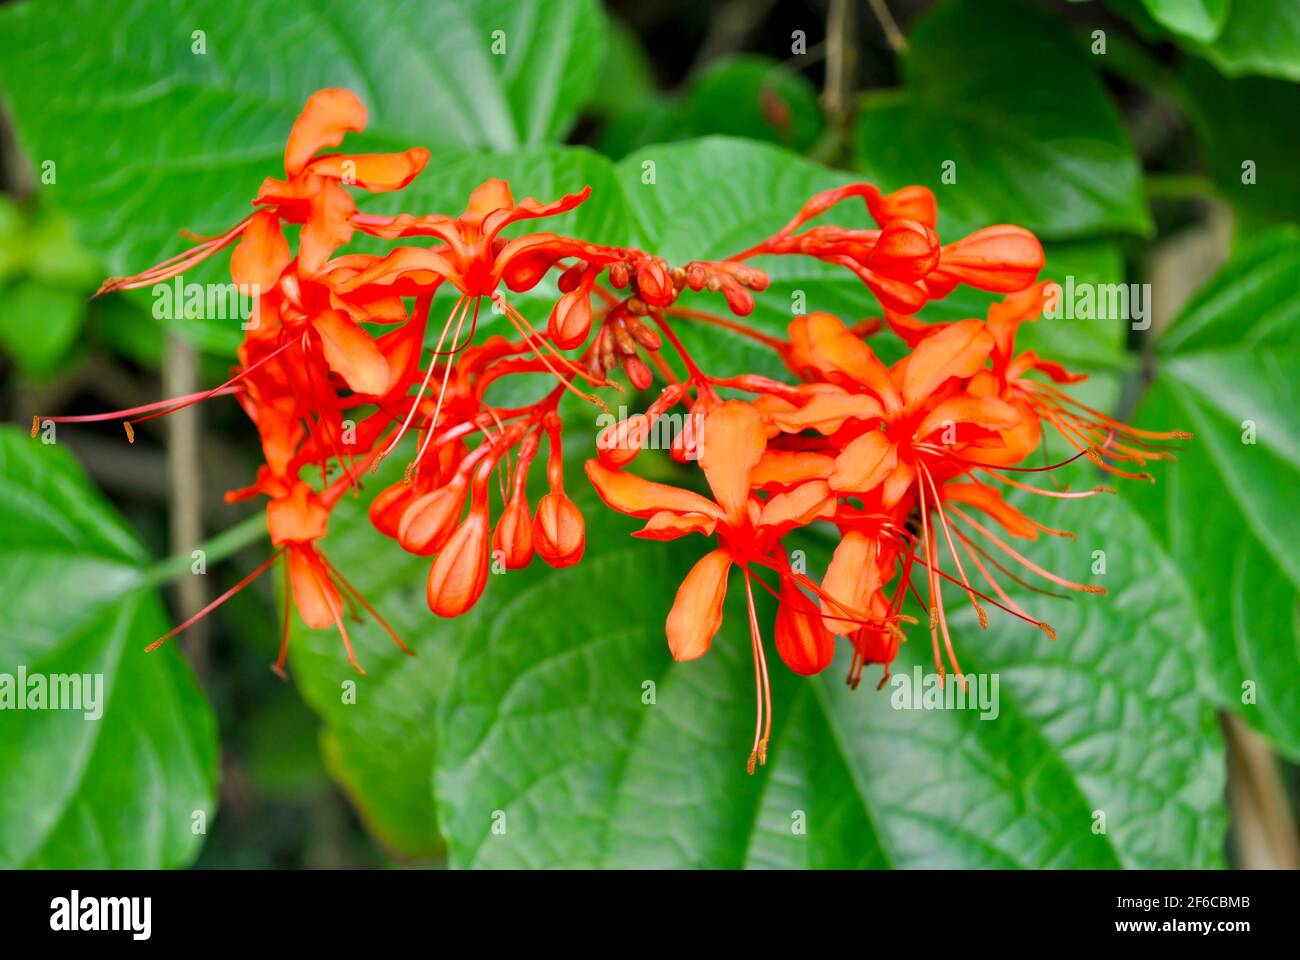 Java Glorybower Latin name Clerodendrum speciosissimum flowers used for some medical ailments Stock Photo